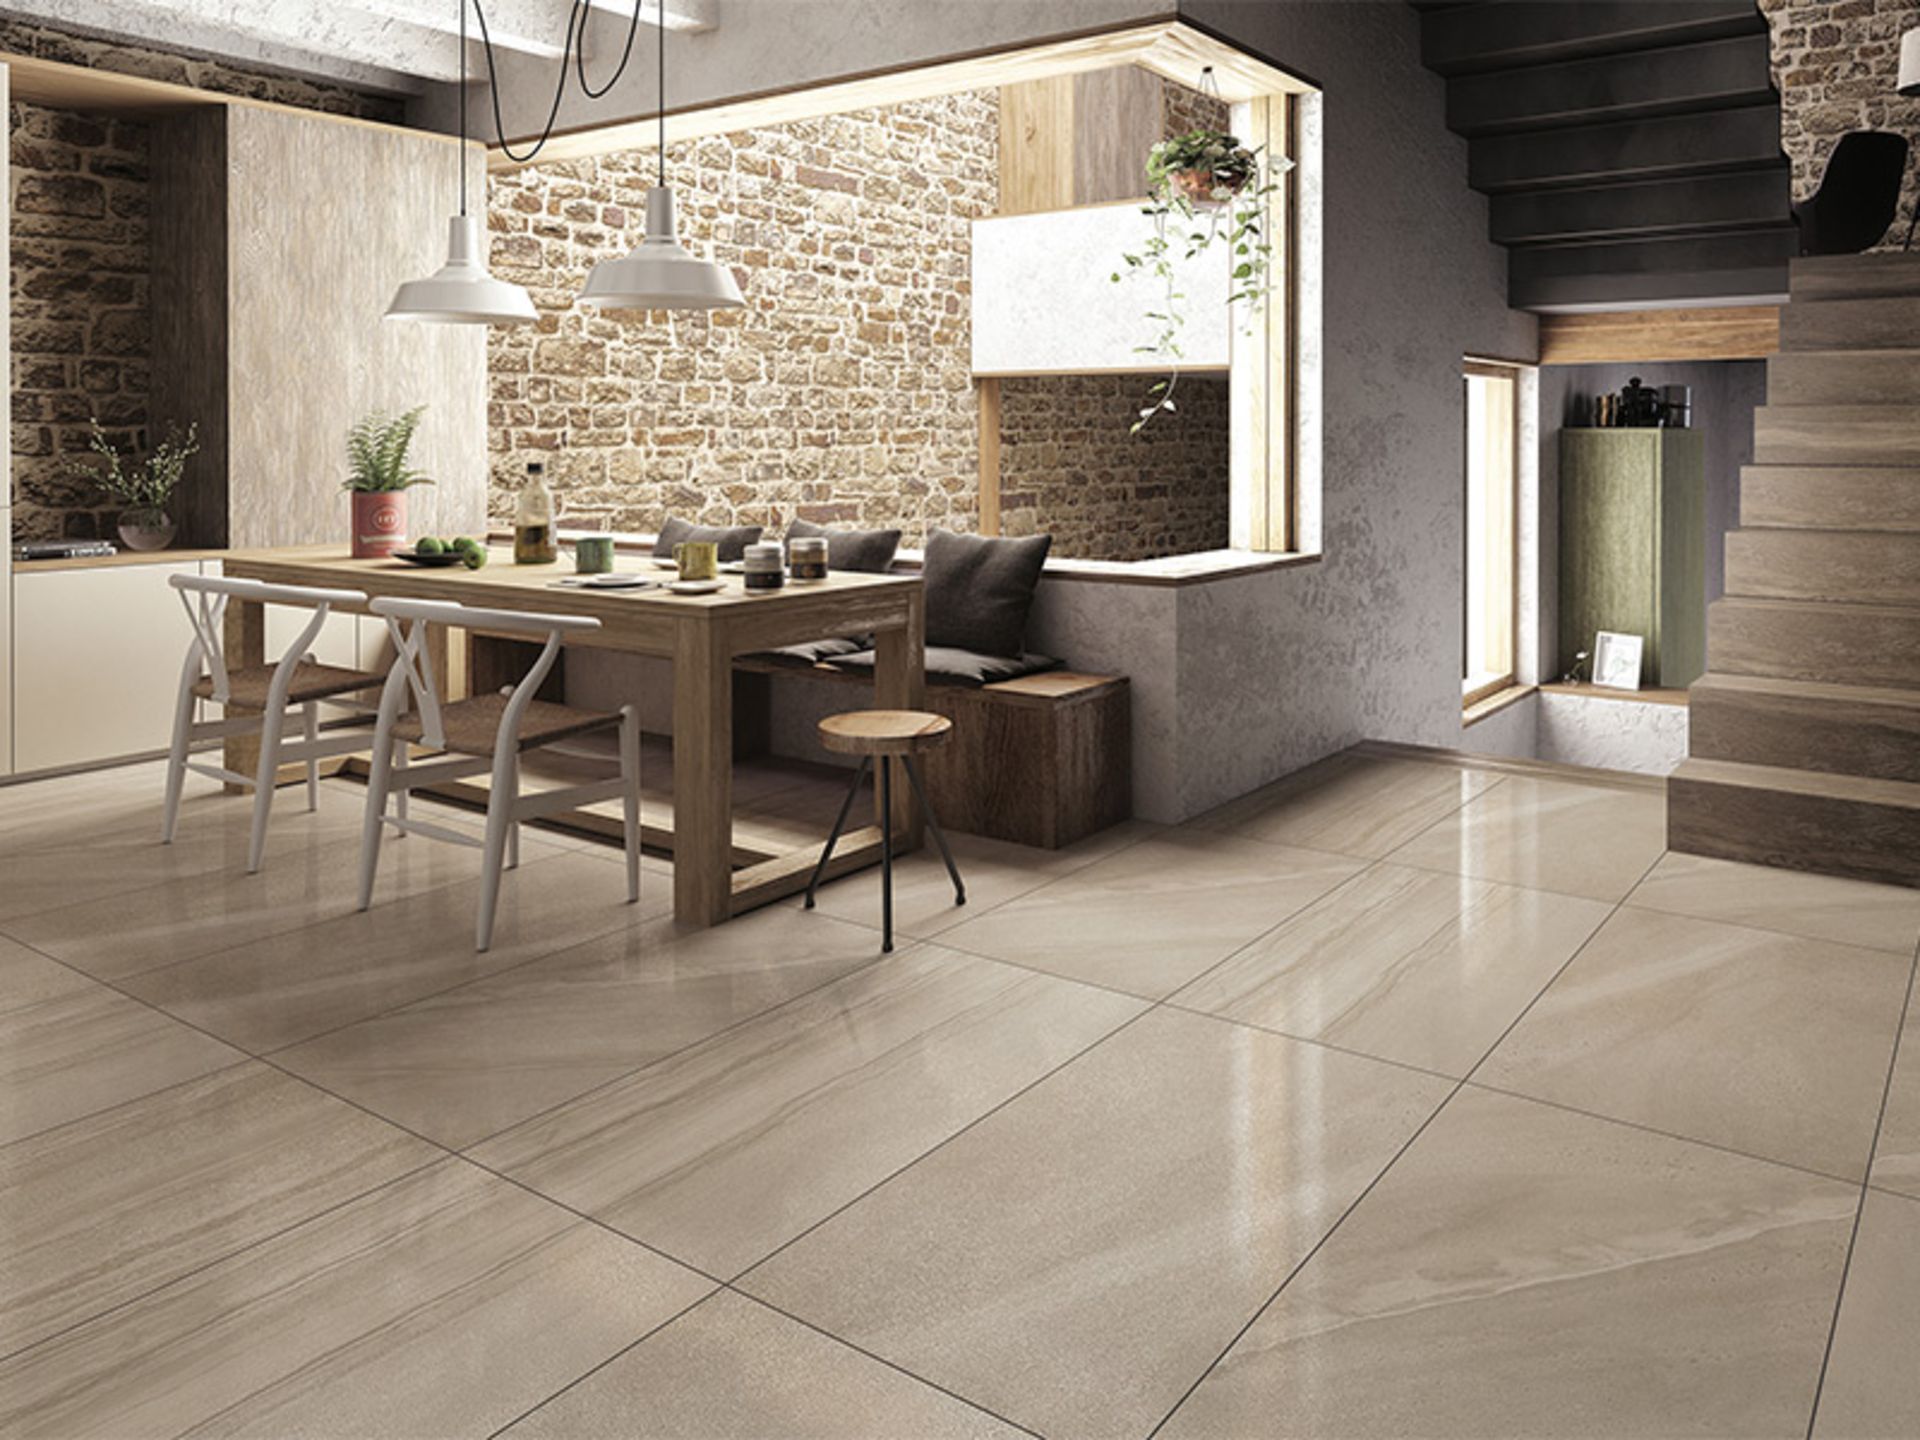 NEW 8.64m2 Bloomsbury Matte Lunar Rock Wall and Floor Tiles. 300x600mm per tile, 8.3mm thick ...